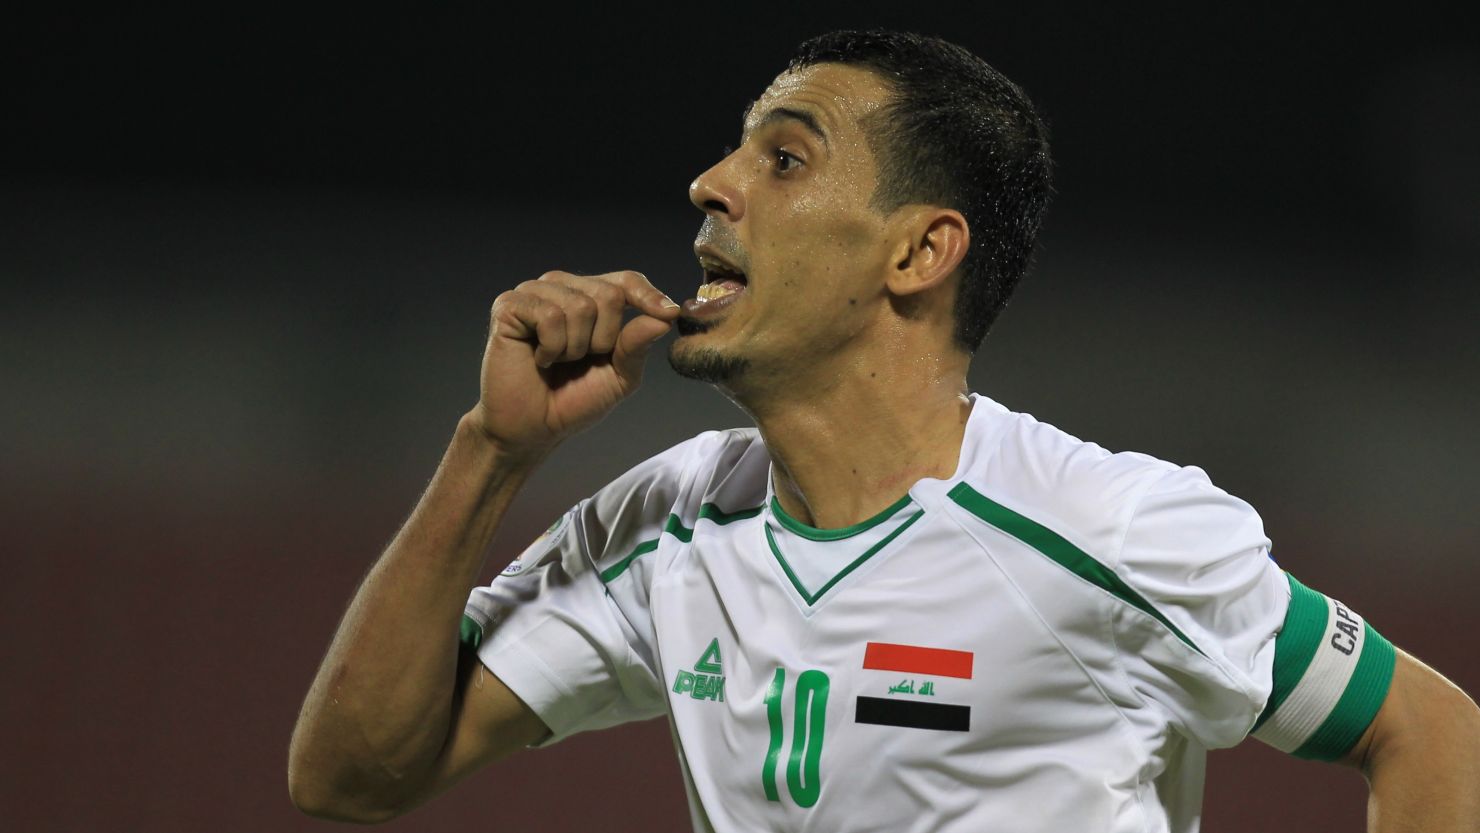 Younis Mahmoud celebrates the only goal of the match as Iraq beat China 1-0 in World Cup qualifying